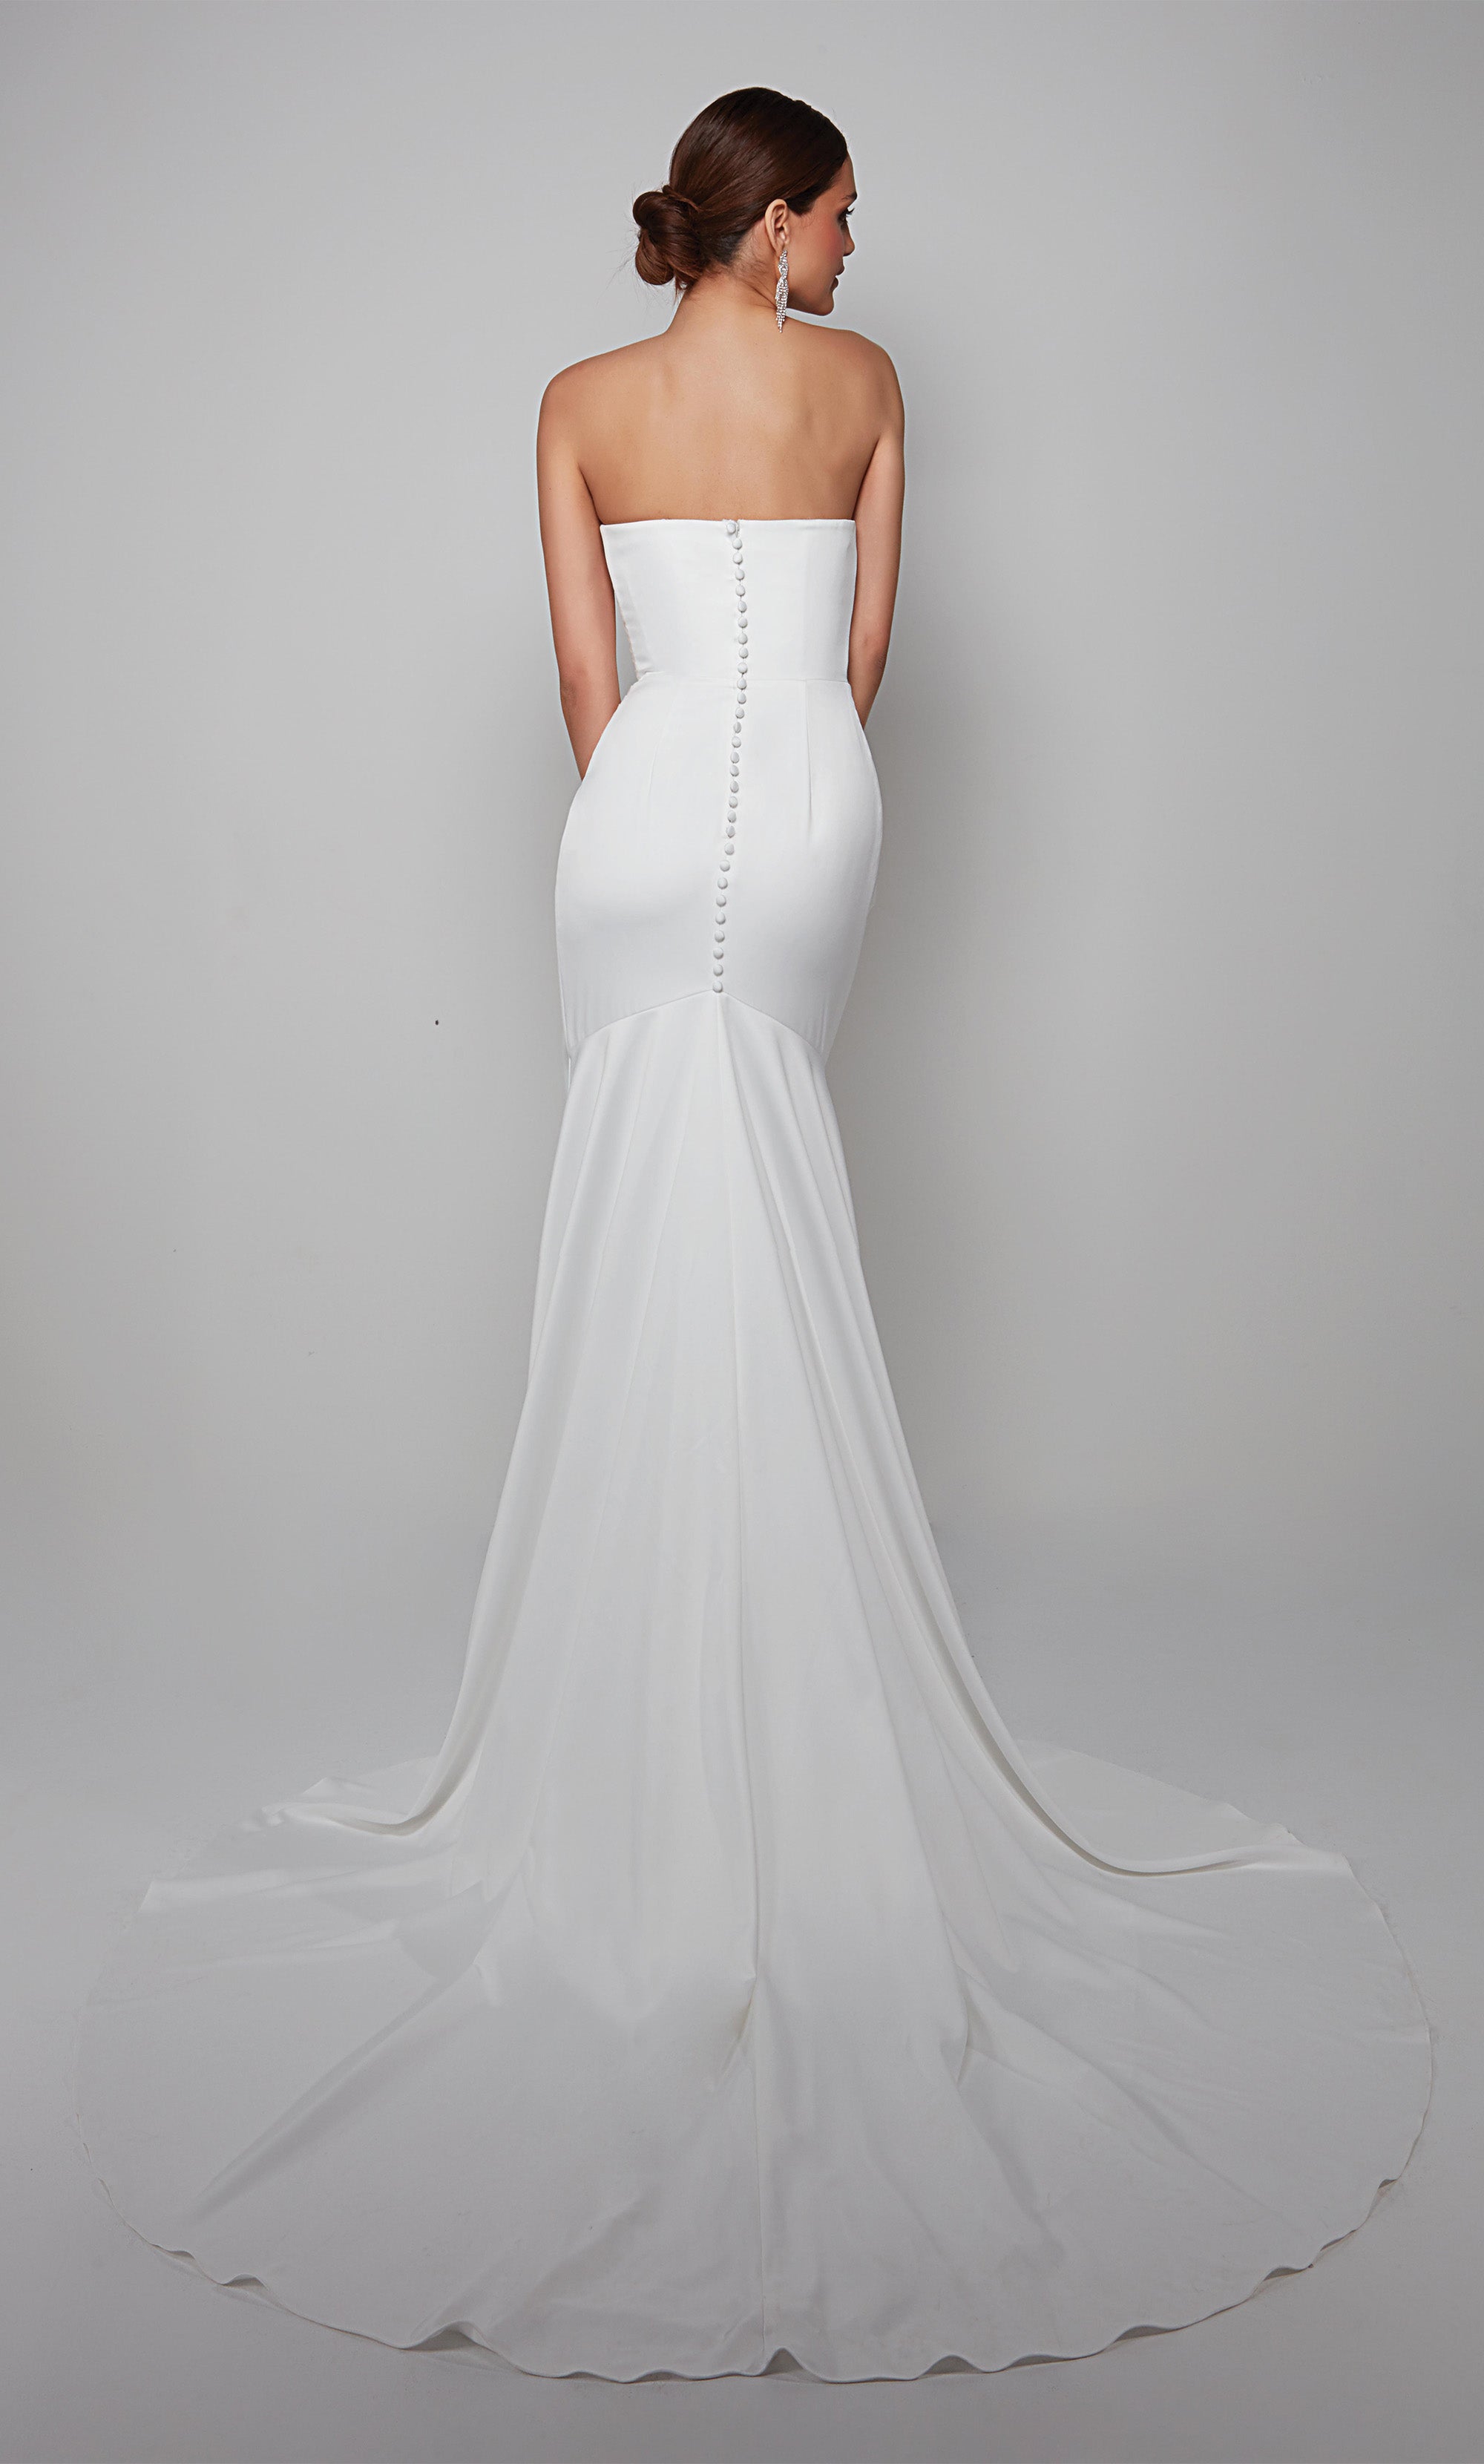 Strapless draped wedding dress with a side slit in white satin. Color-SWATCH_7057__DIAMOND-WHITE